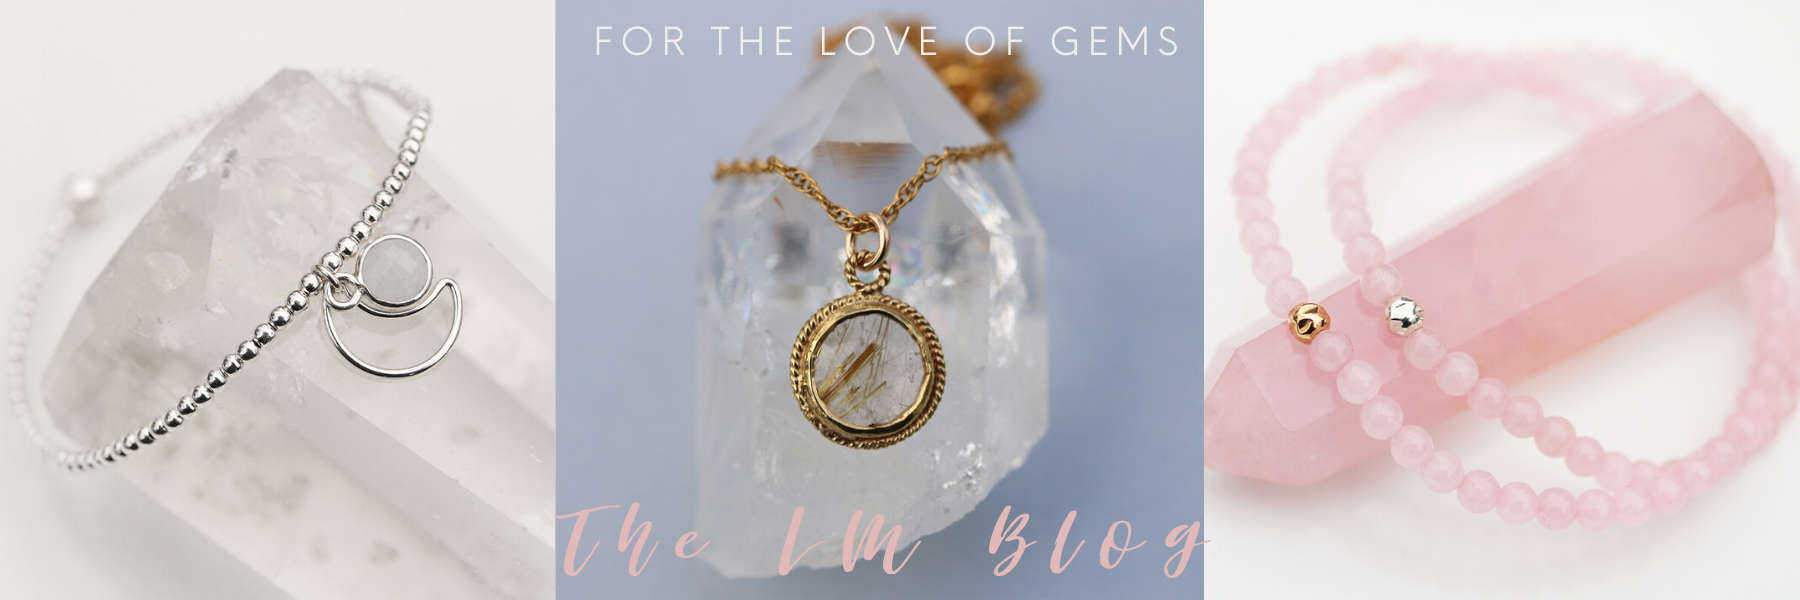 For The Love of Gems: The Lisa Maxwell Jewelry Blog. Featuring Gemstone Healing Information, How to Care For Your Jewelry, Our Favourite Picks and More!